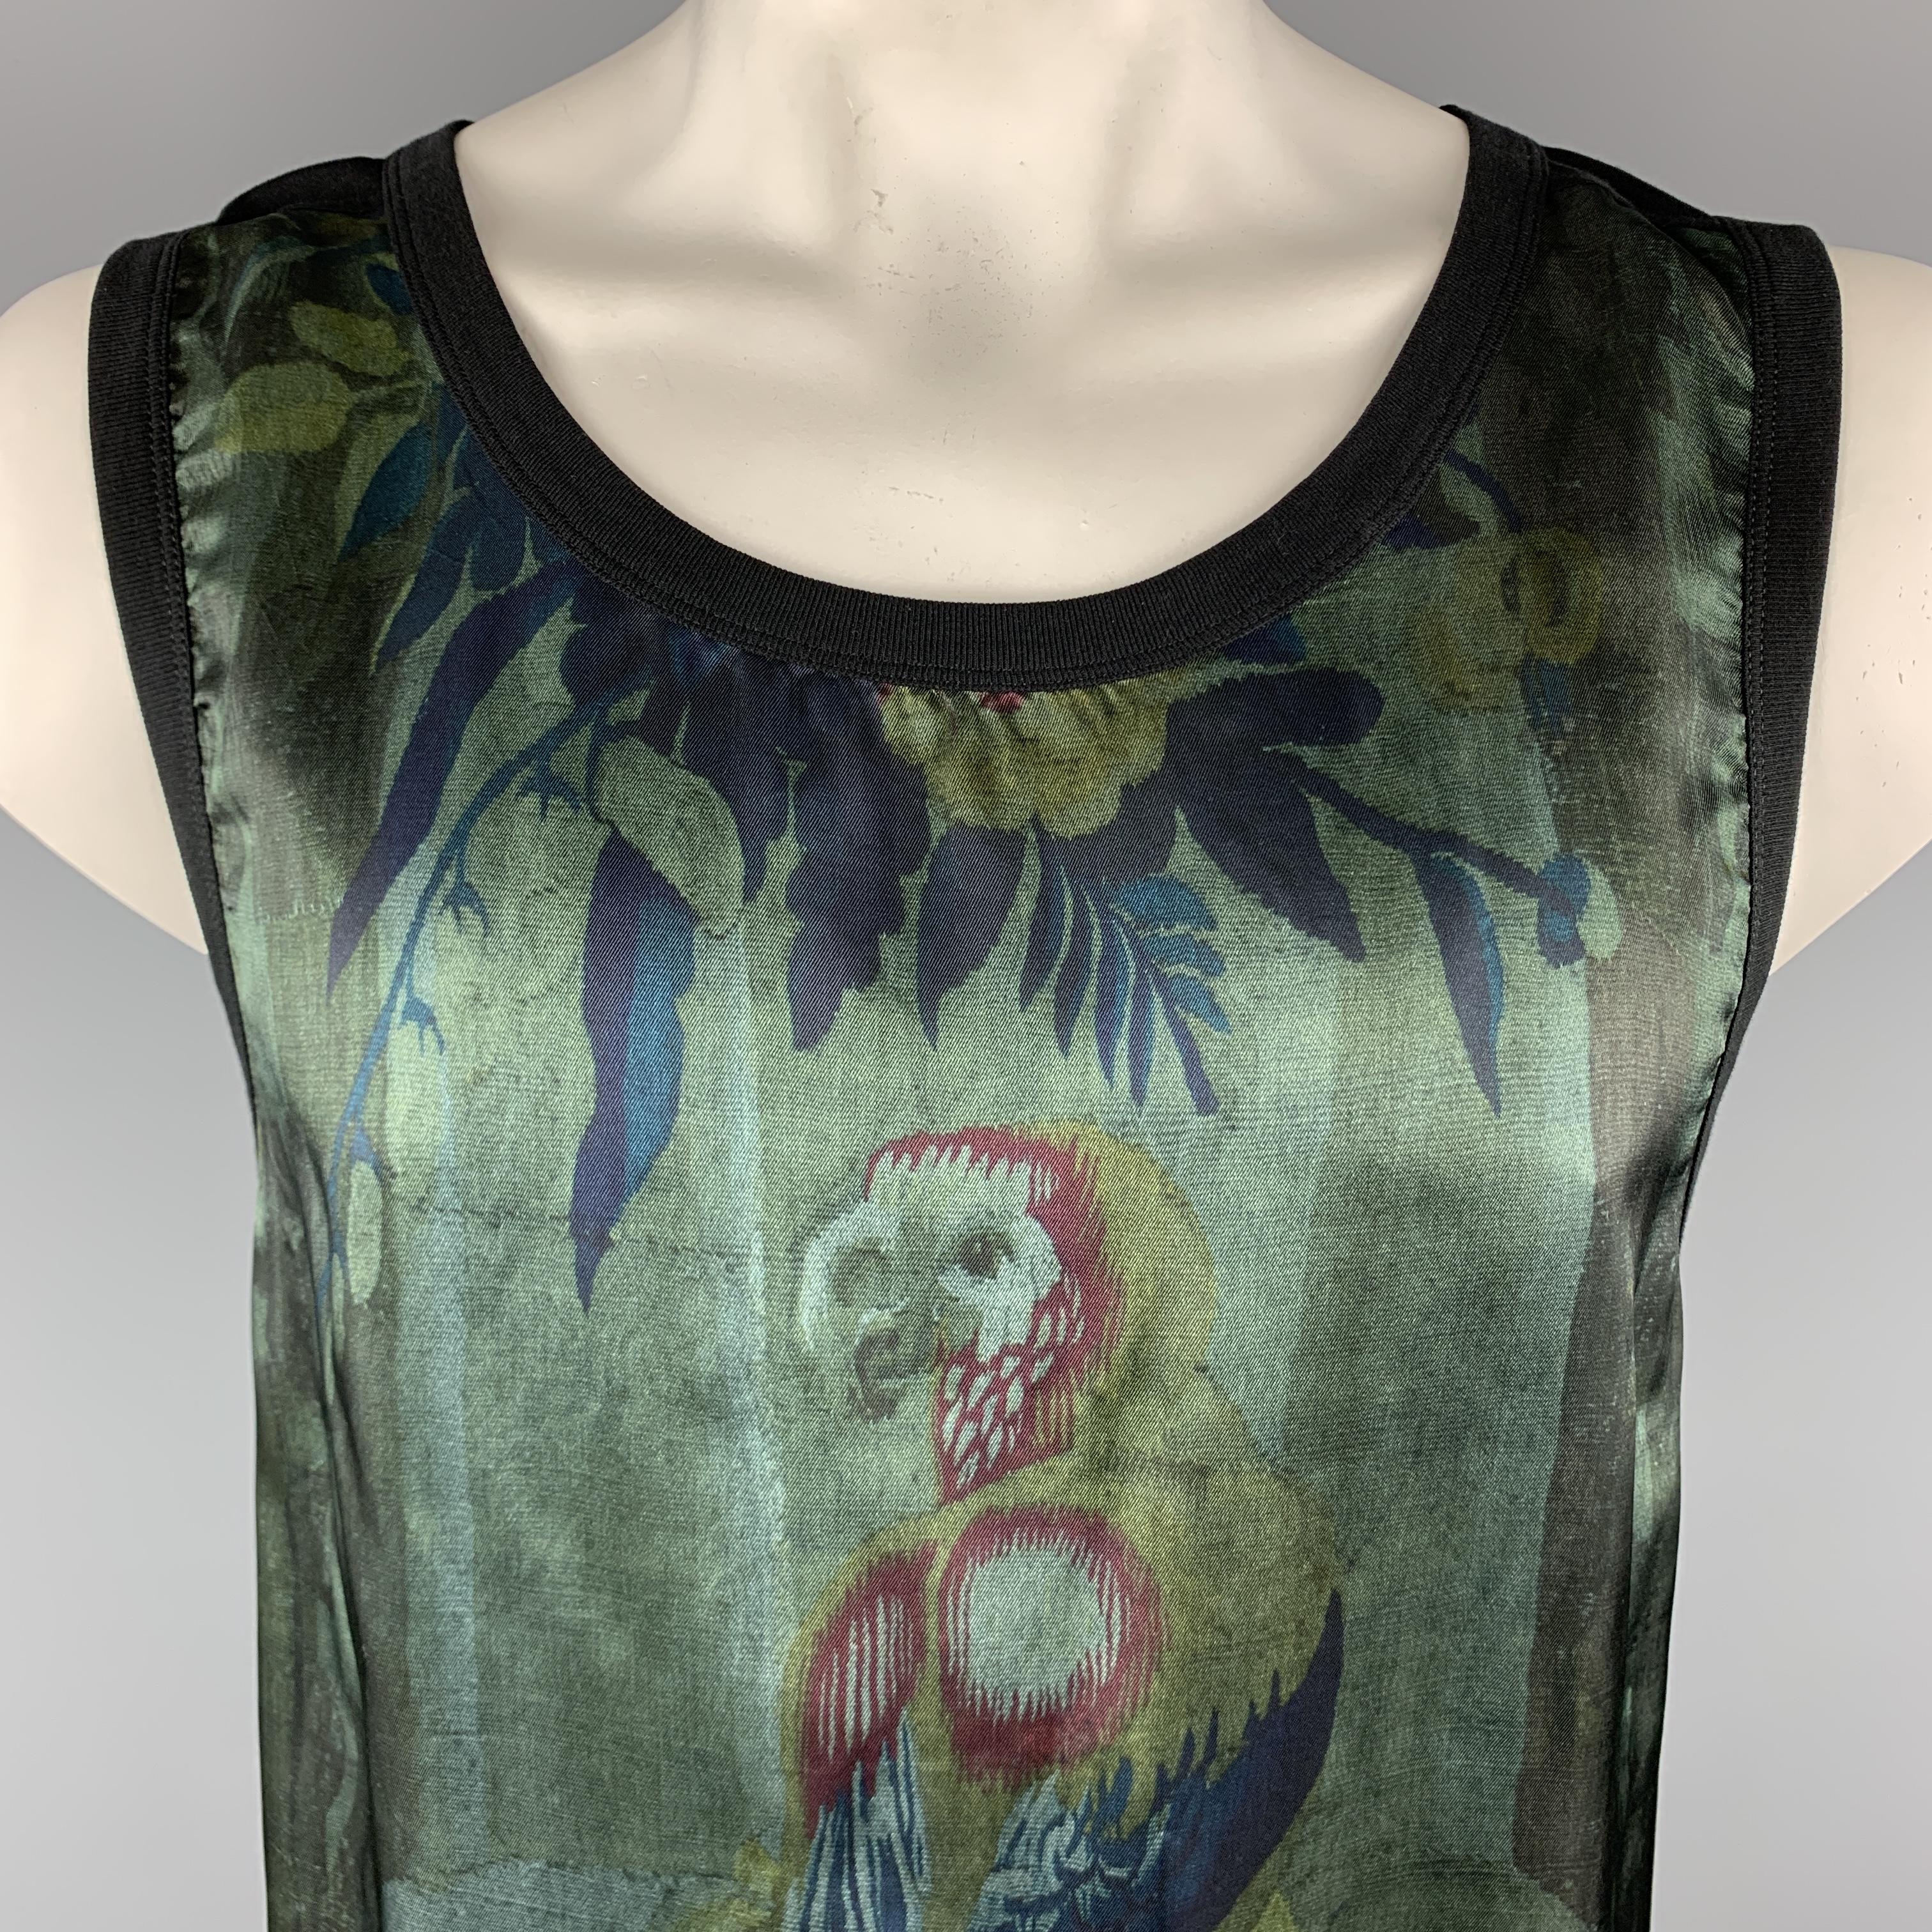 DRIES VAN NOTEN Tank Top comes in black and multi-color tones in a cotton/viscose material, with a 